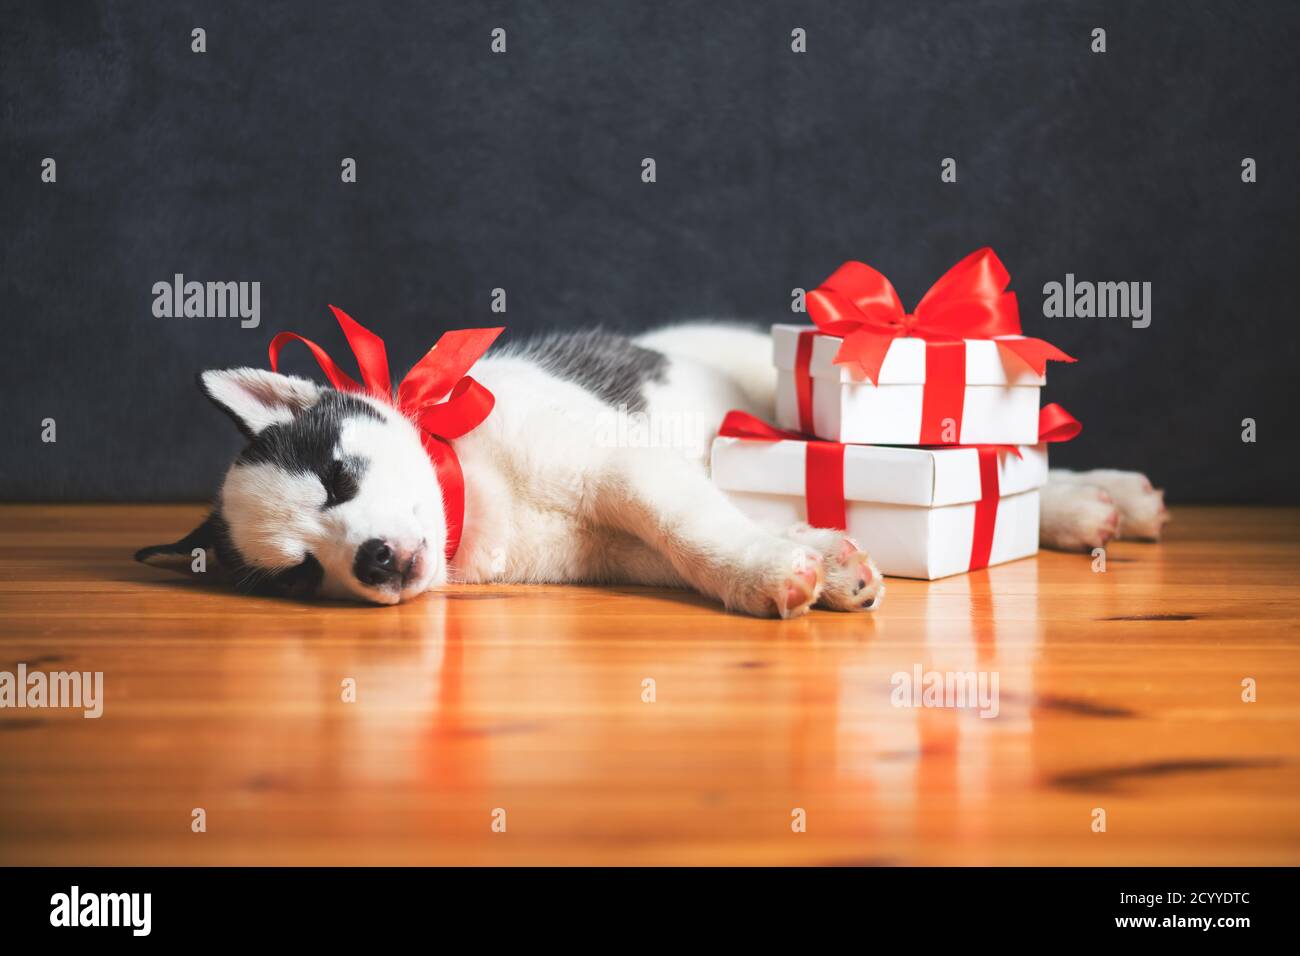 A small white dog puppy breed siberian husky with red bow and gift boxes sleep on wooden floor. Perfect birthday and Christmas present for your child Stock Photo